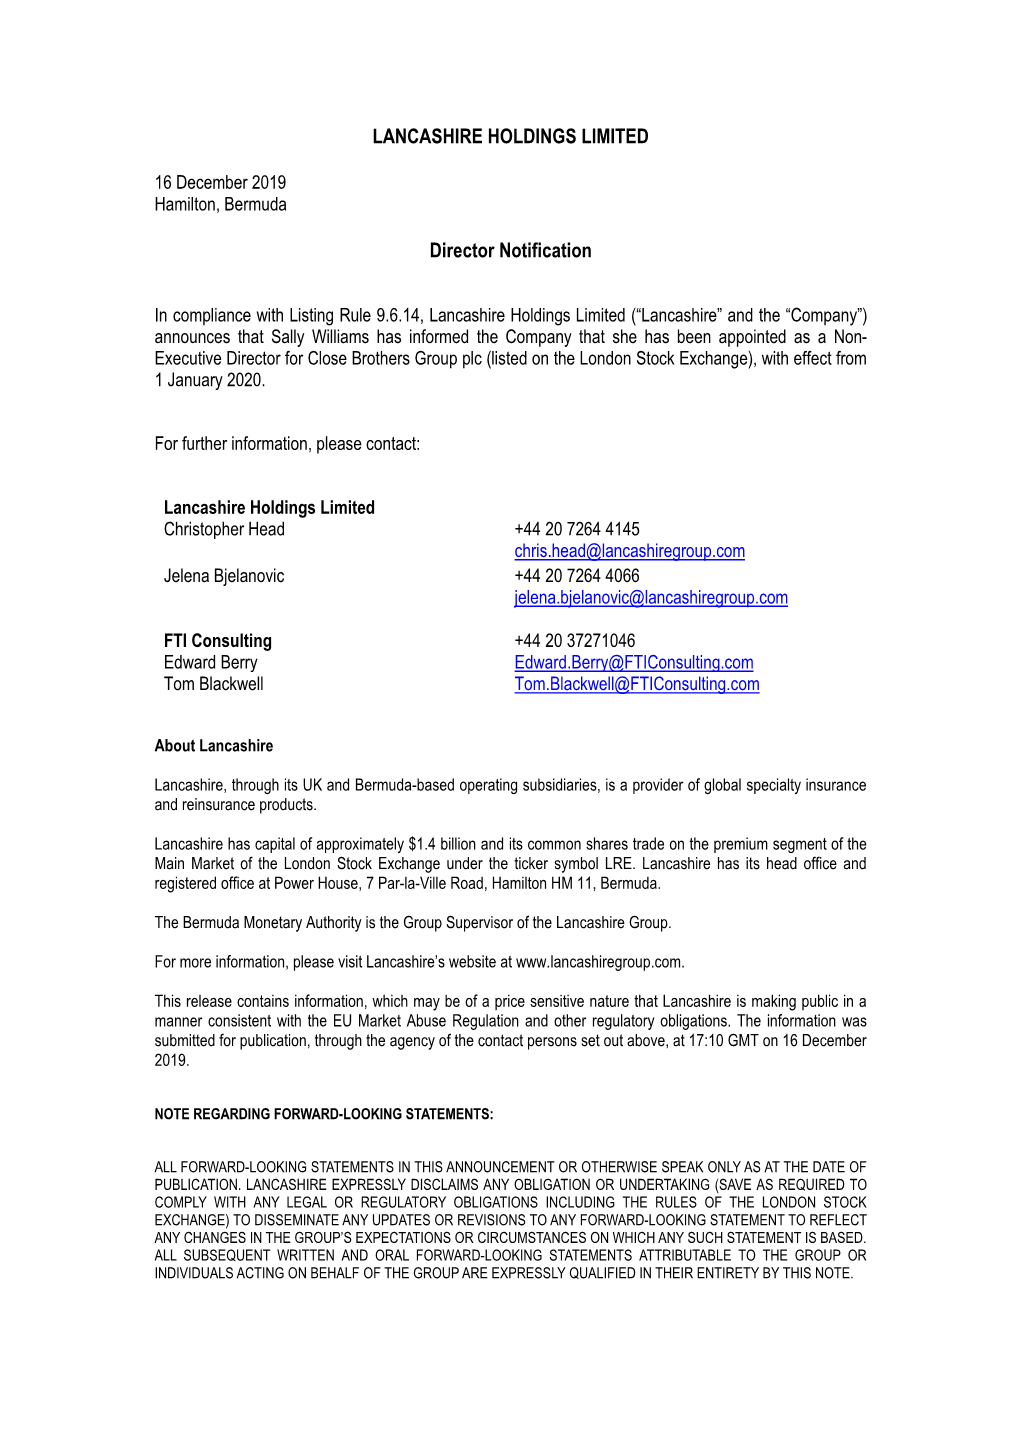 LANCASHIRE HOLDINGS LIMITED Director Notification